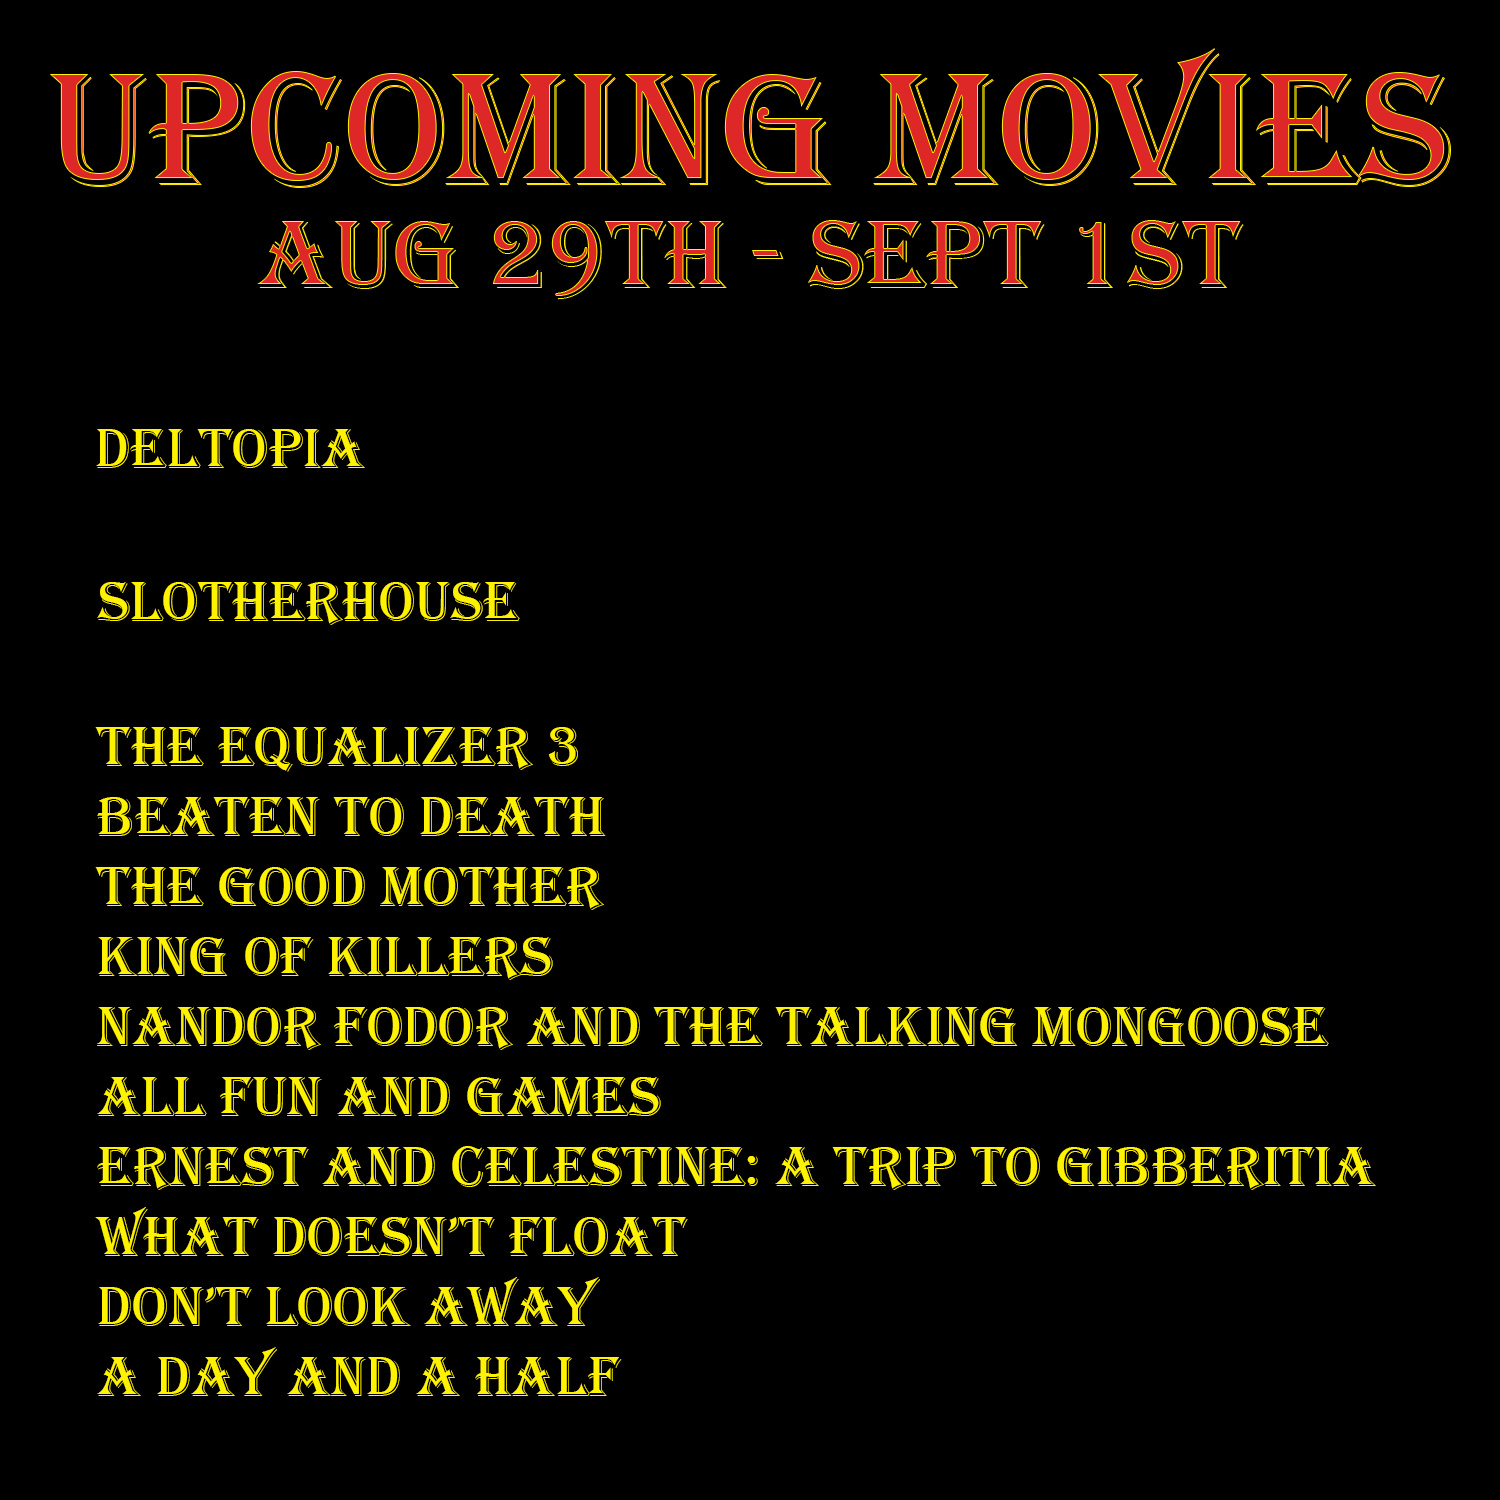 Upcoming Movies (August 29th - September 1st) (12 Movies)